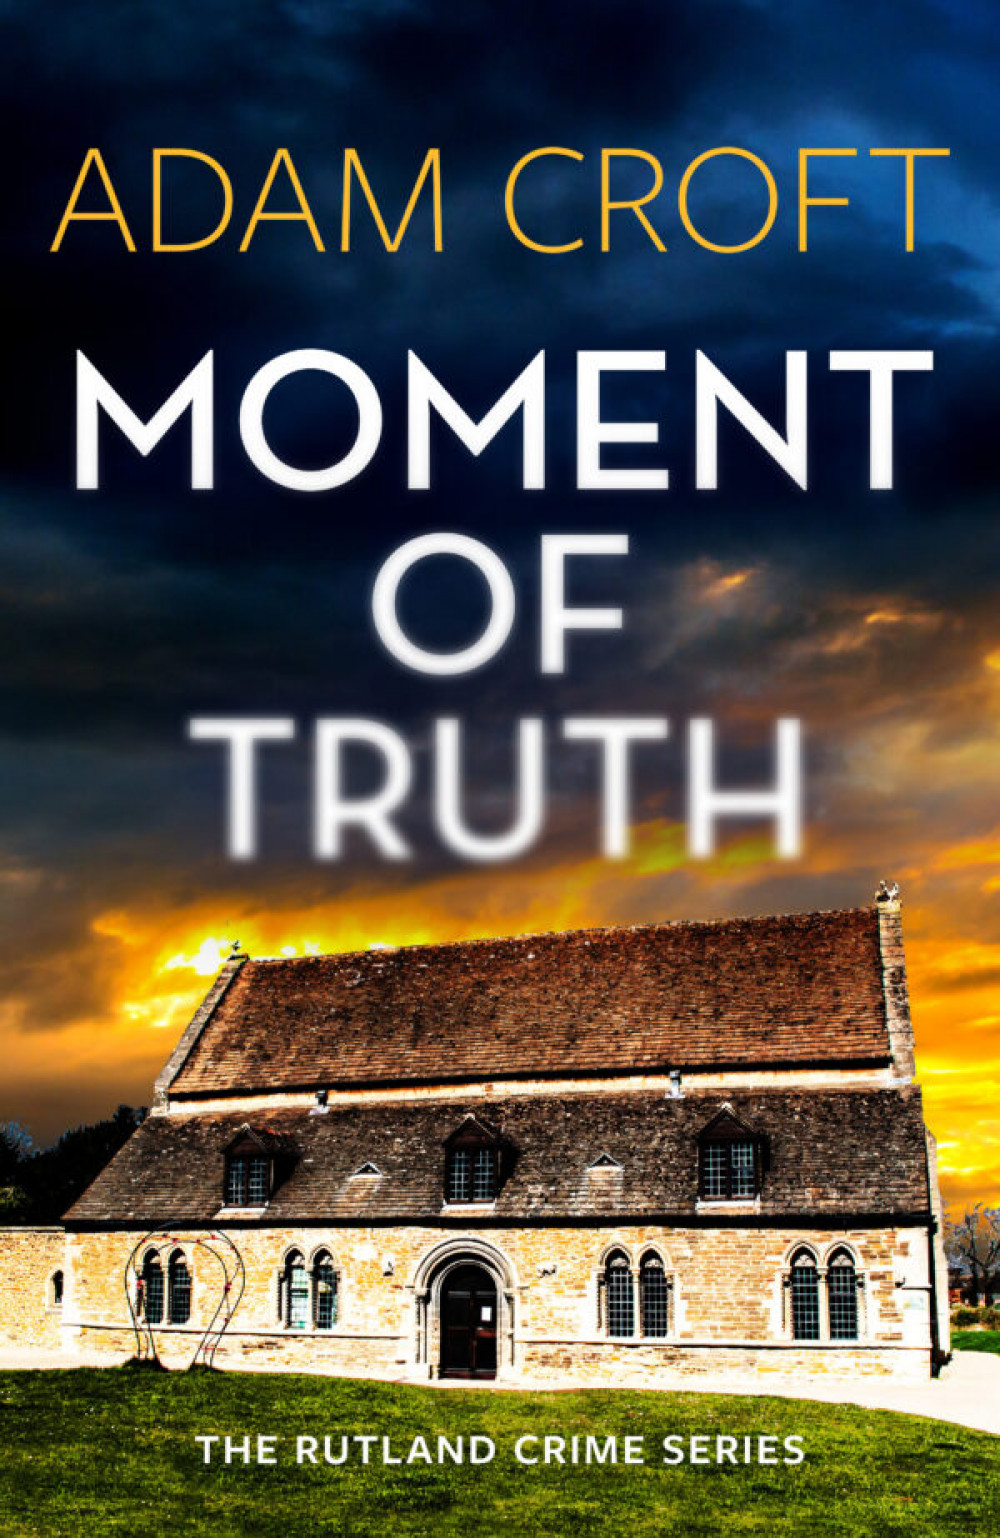 'Moment of Truth' cover (image courtesy of Adam Croft)